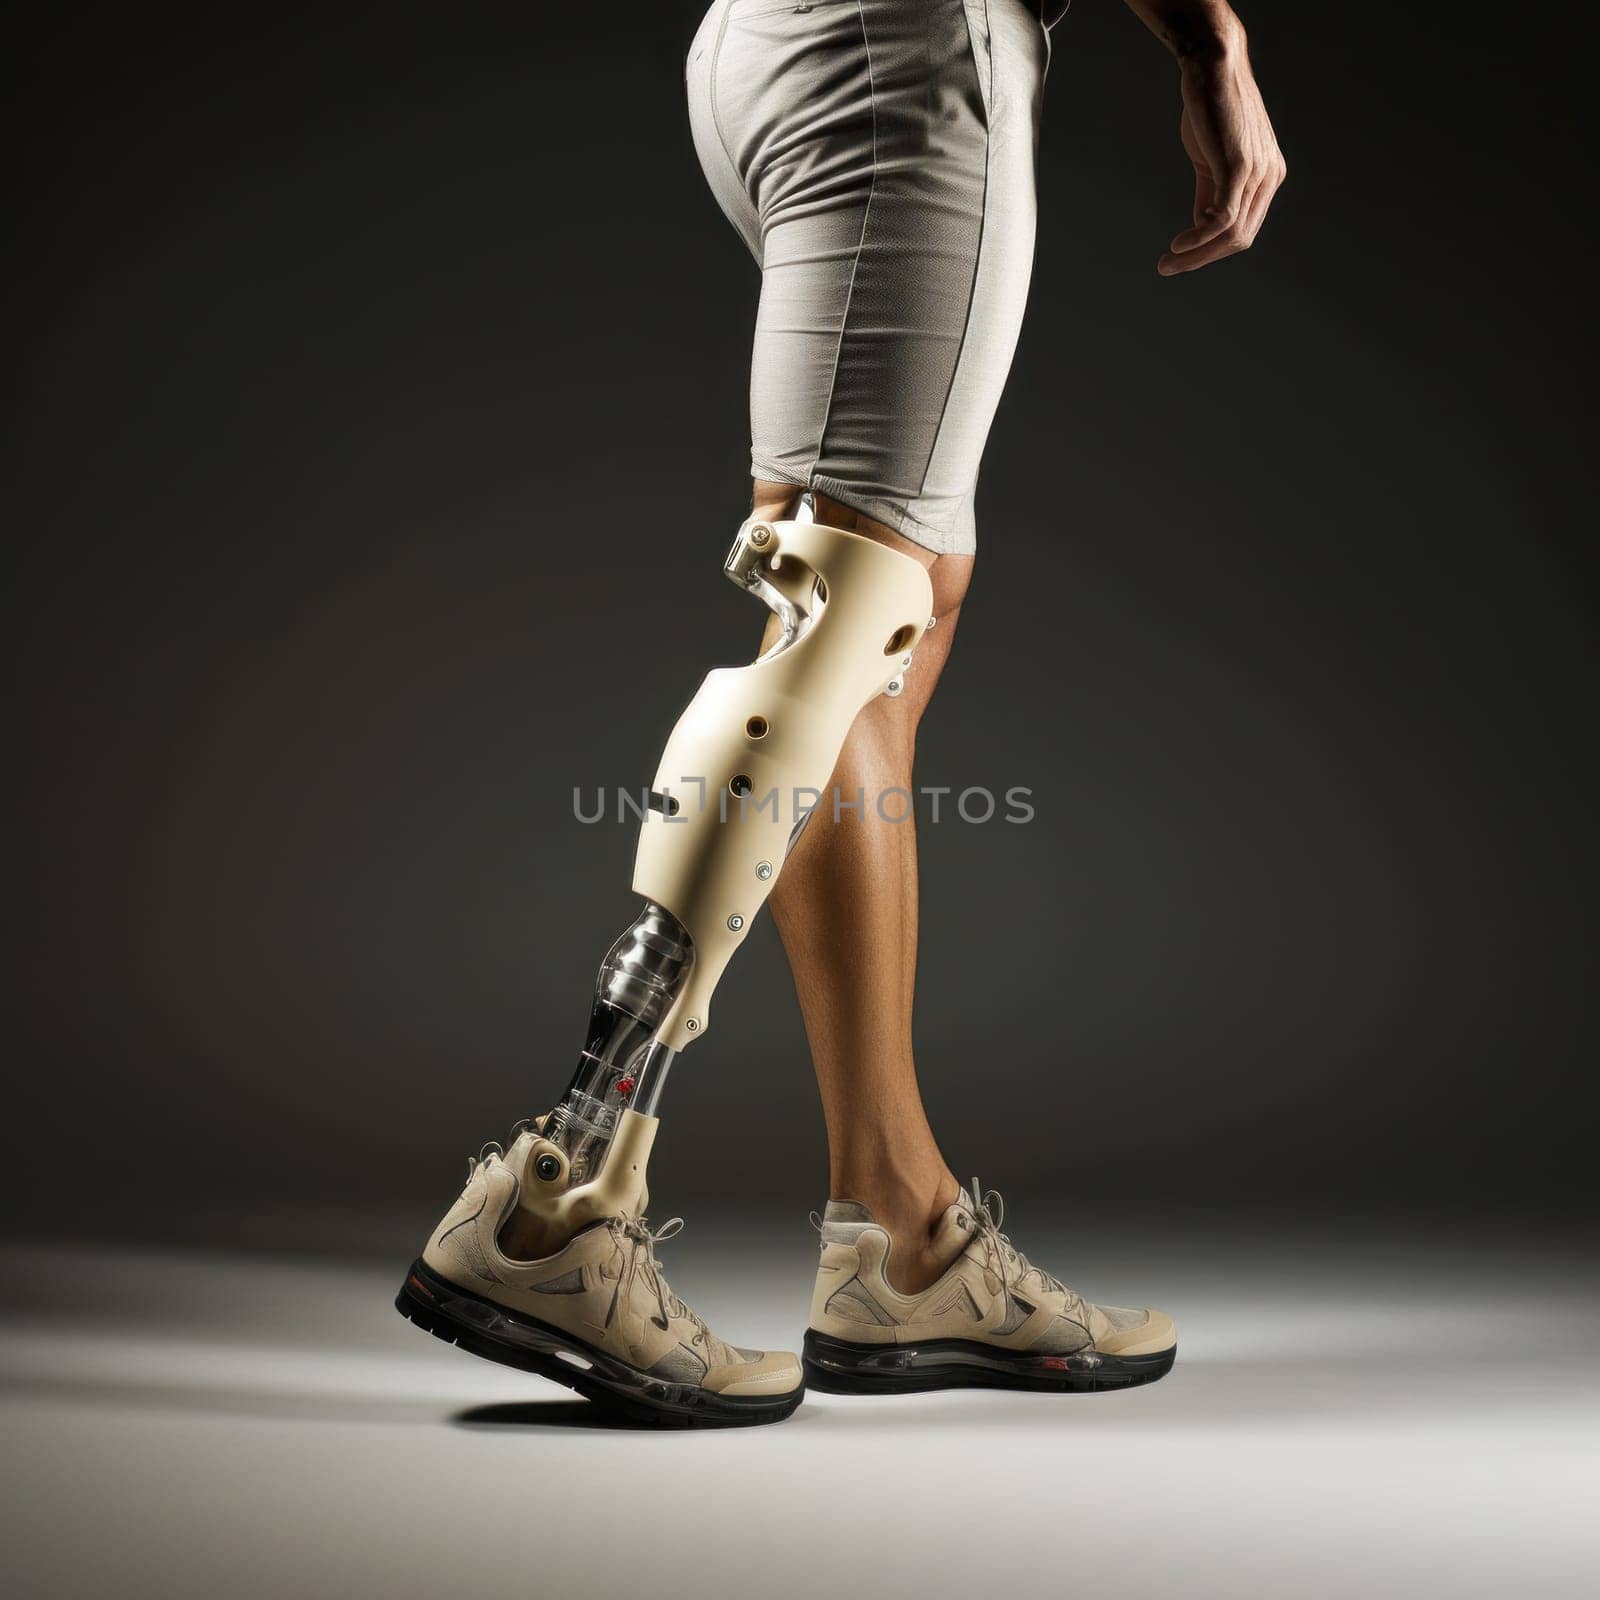 A stunning image of a man with a prosthetic leg, showcasing innovative medical rehabilitation and physical activity technologies.